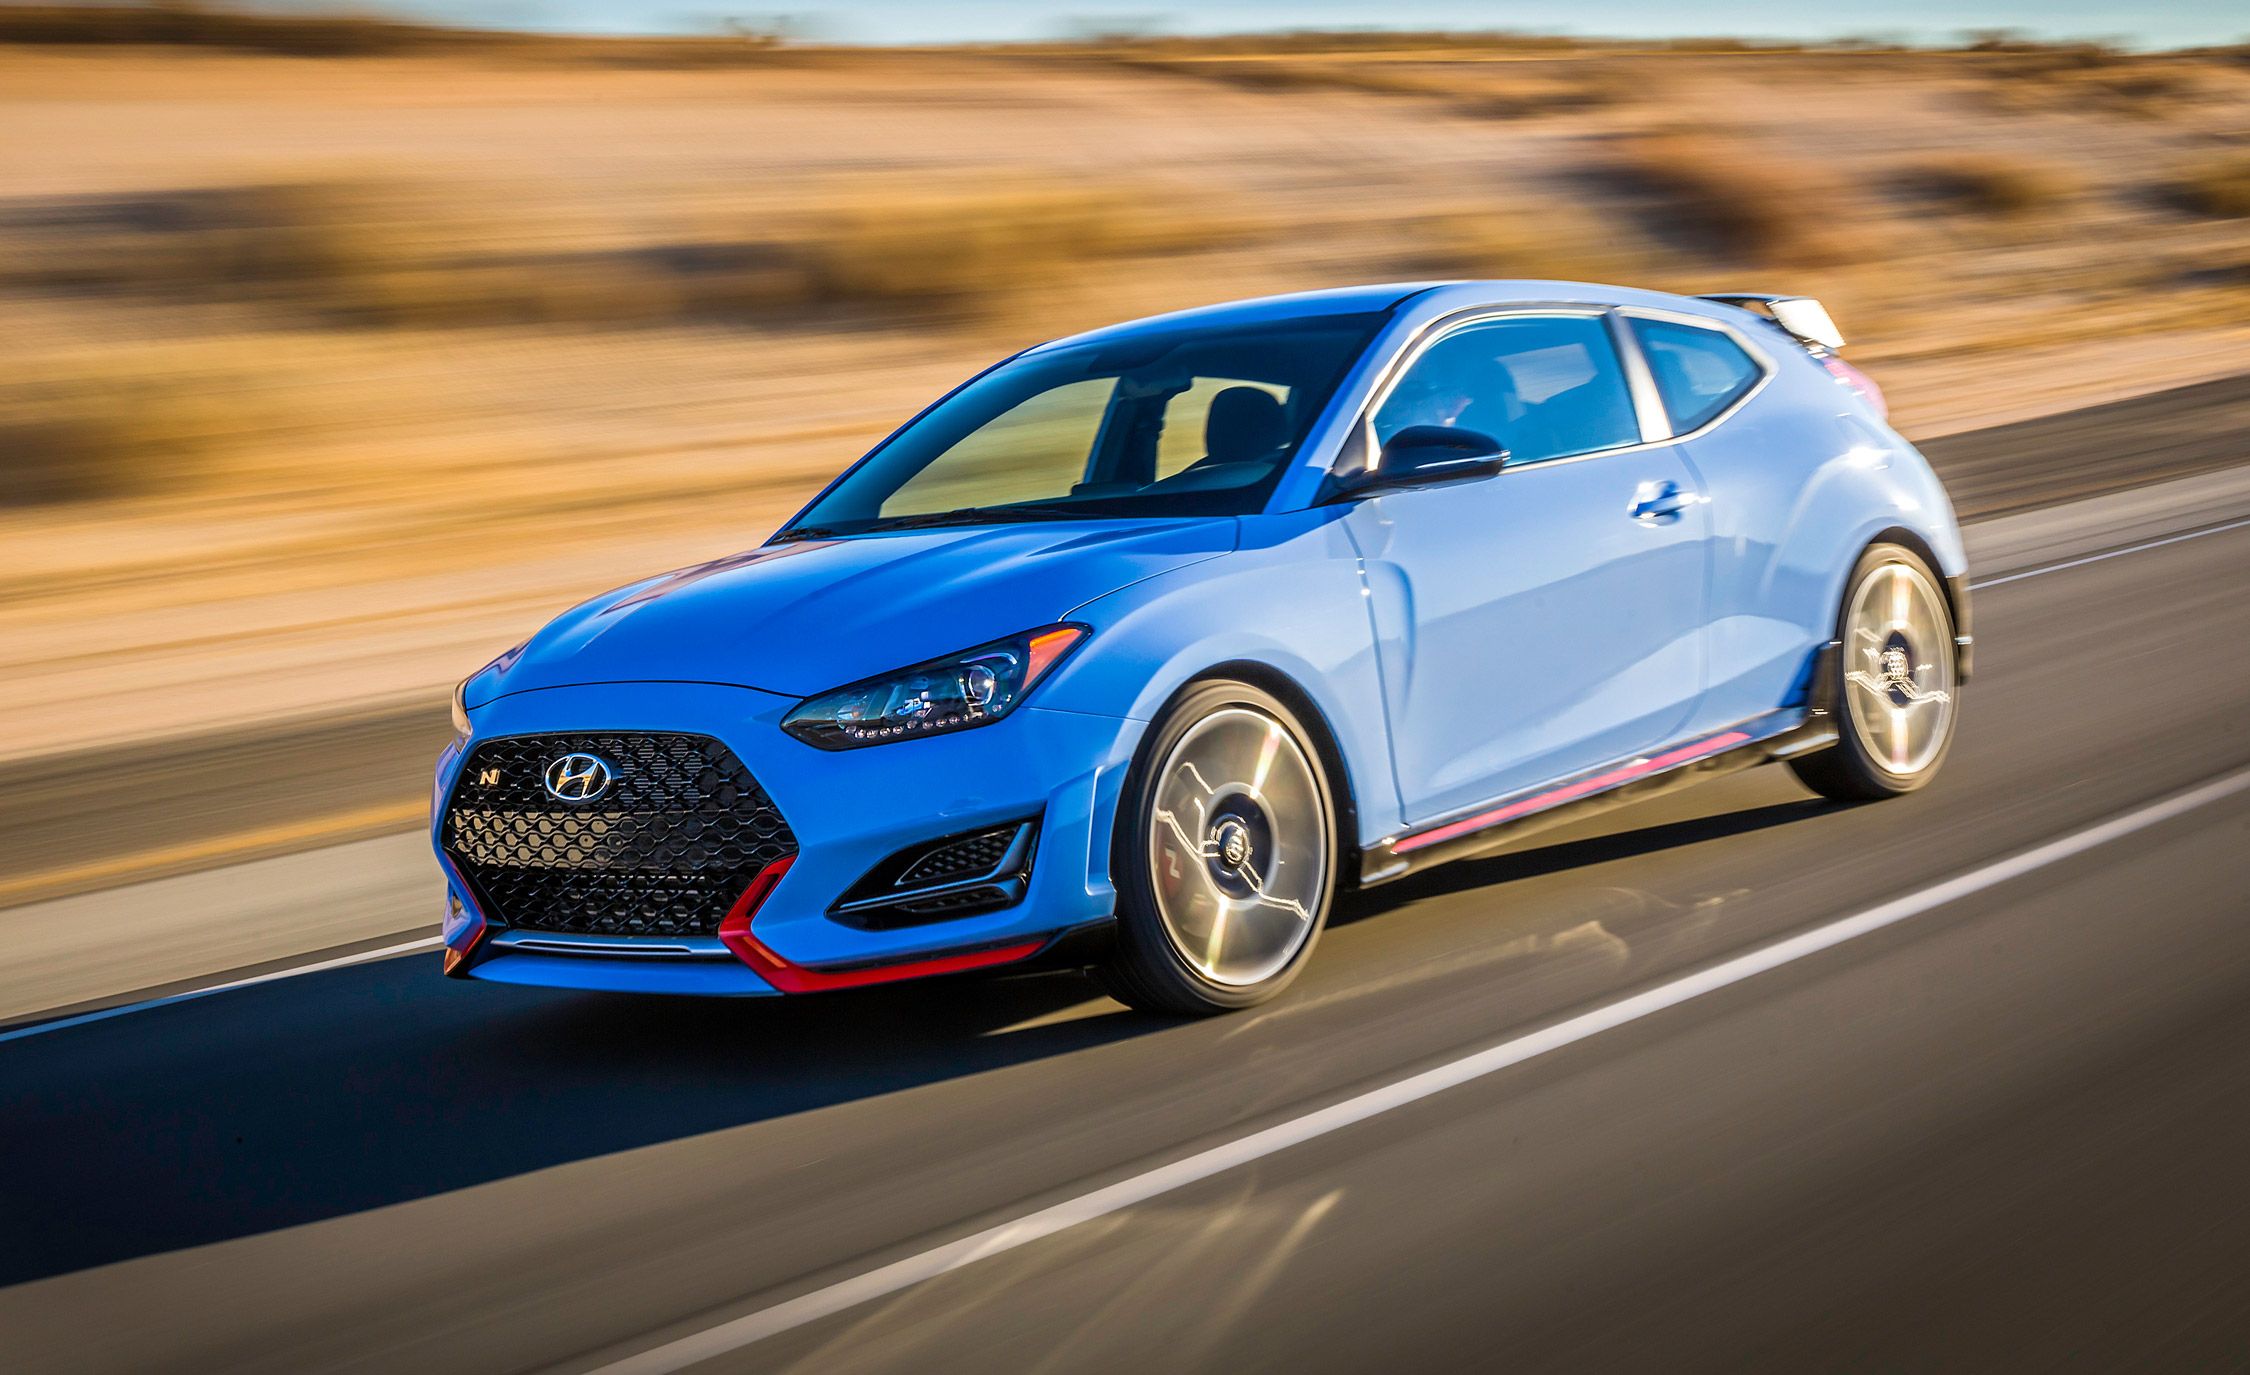 2019 Hyundai Veloster N With up to 275 HP, It Could Be Something